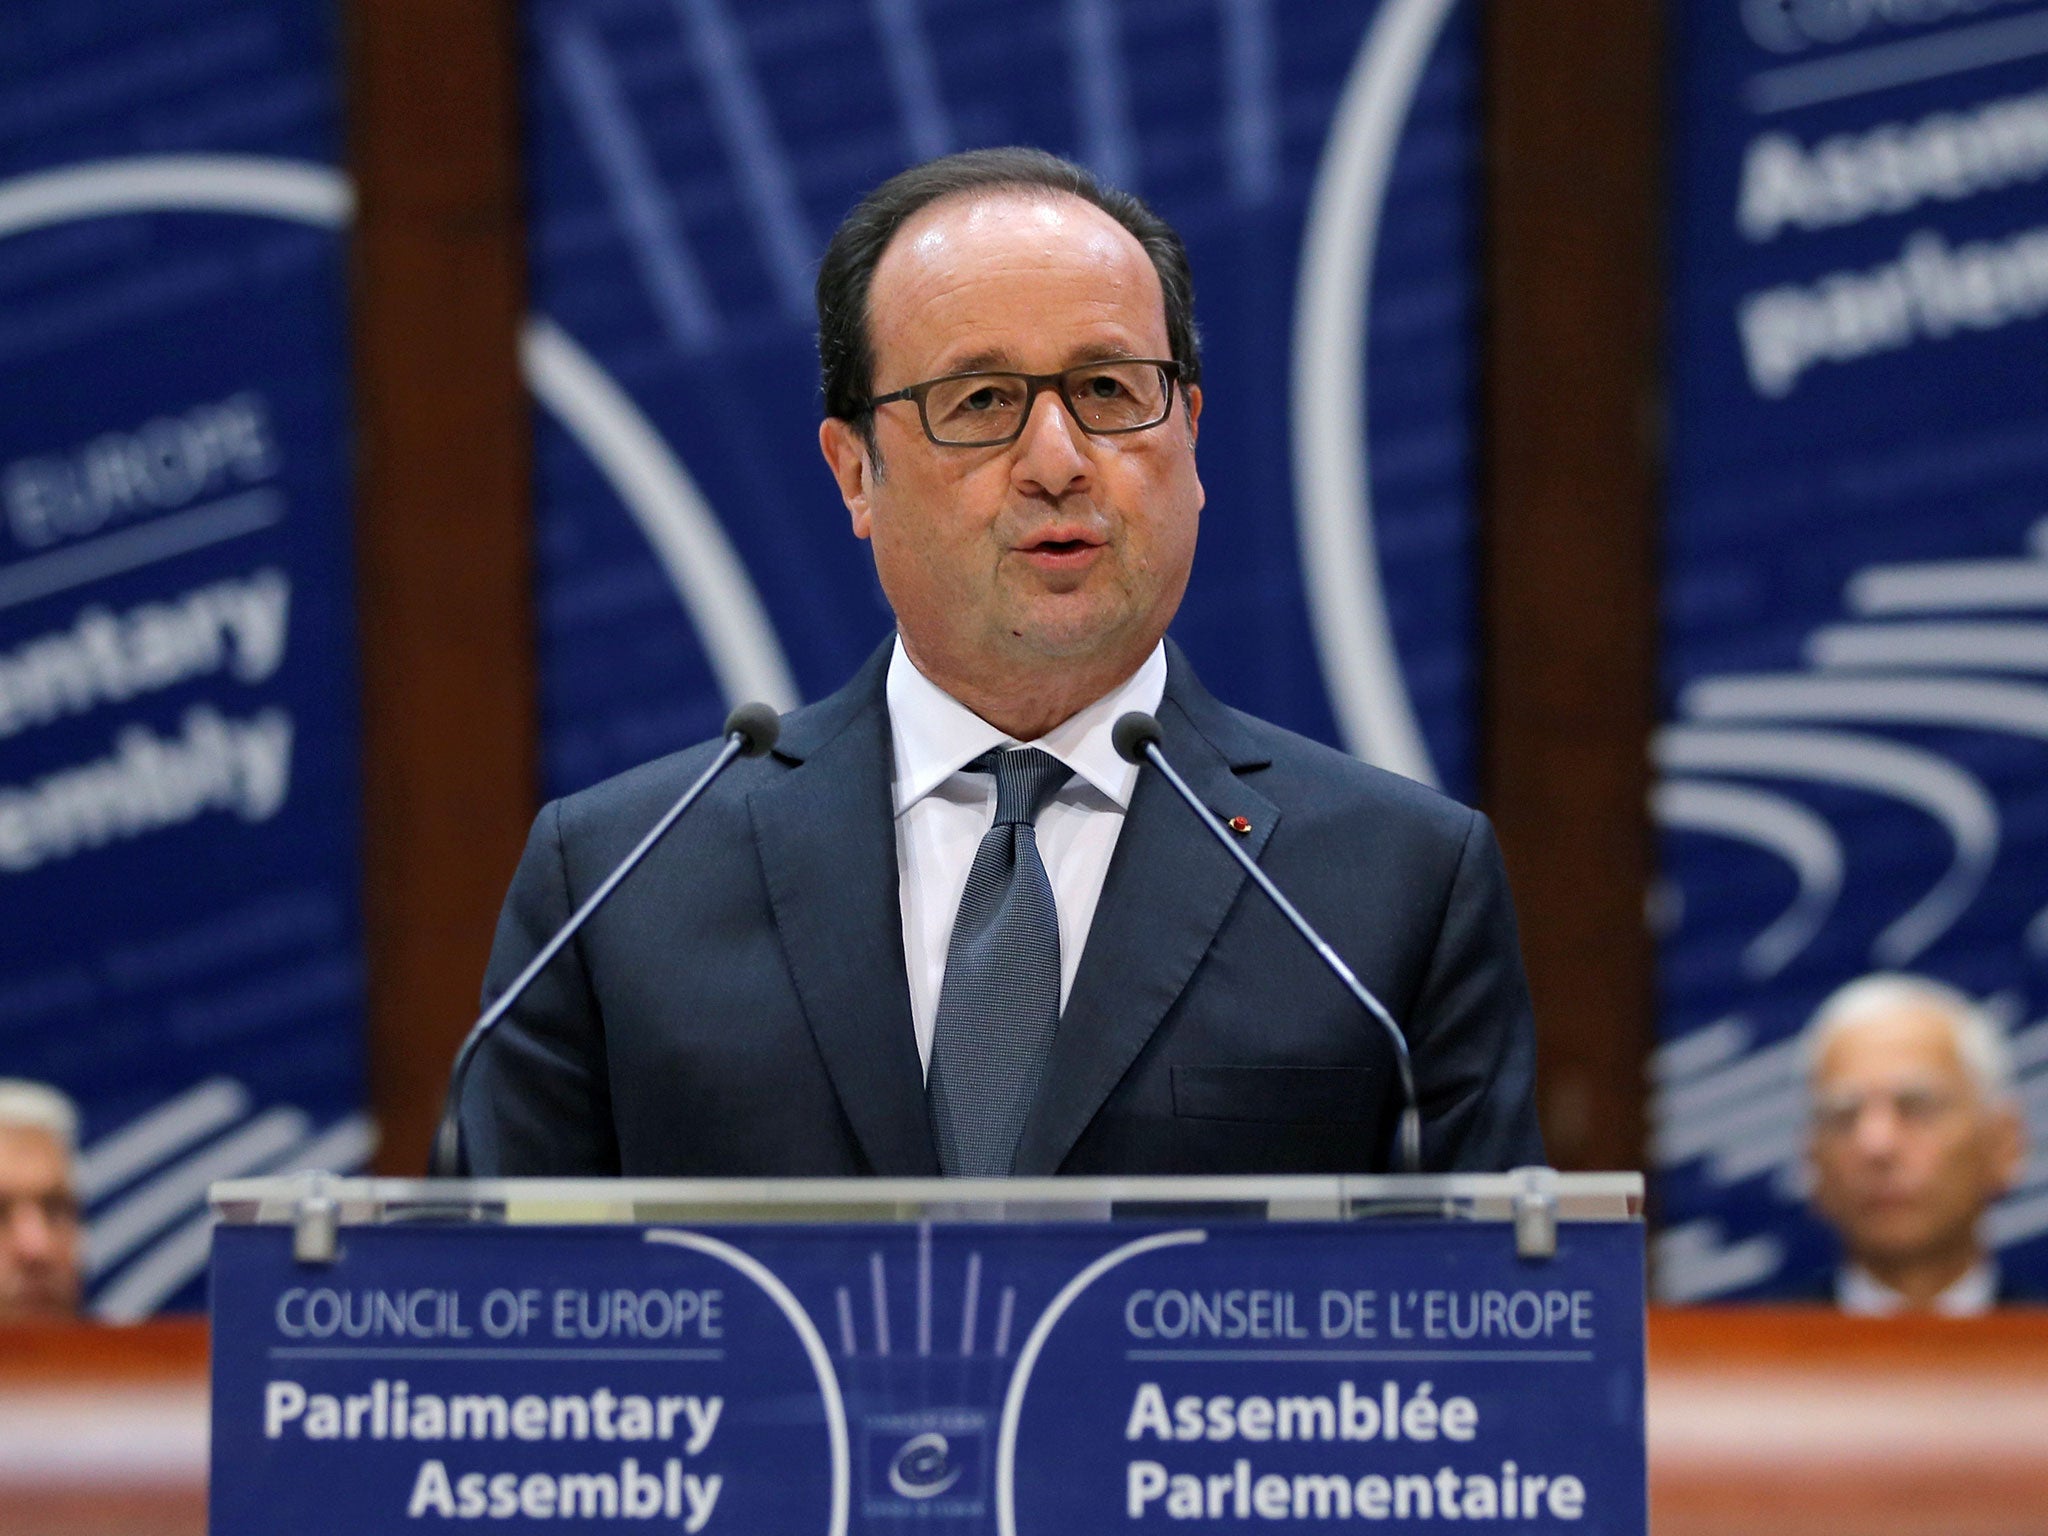 Mr Hollande’s comments were called degrading by a magistrate